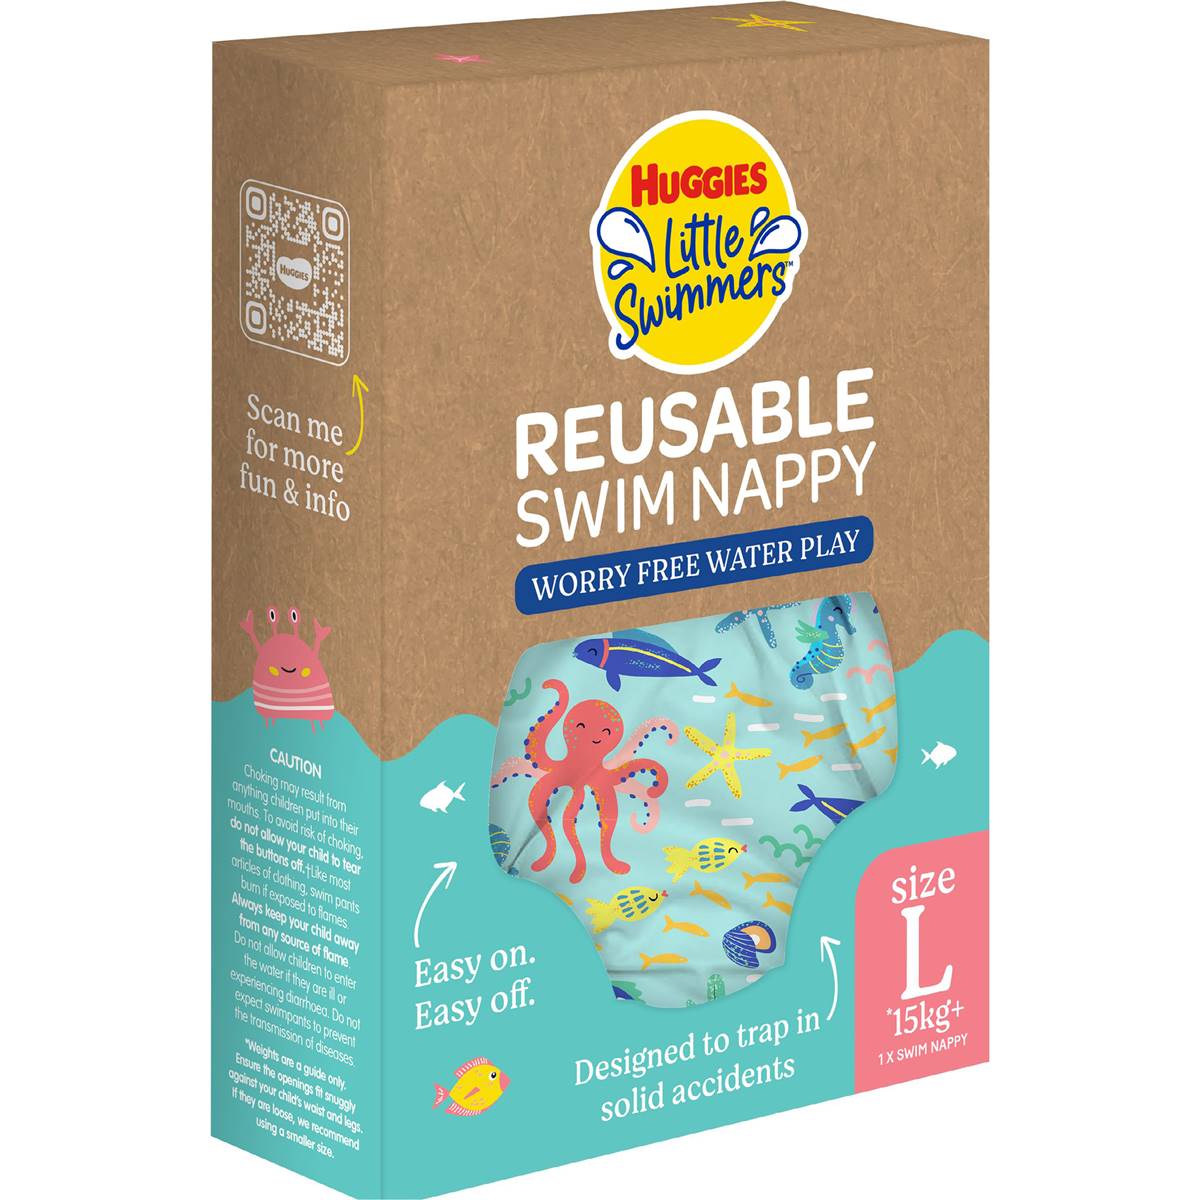 Huggies Little Swimmers Reusable Swim Nappies Large 1 Pack